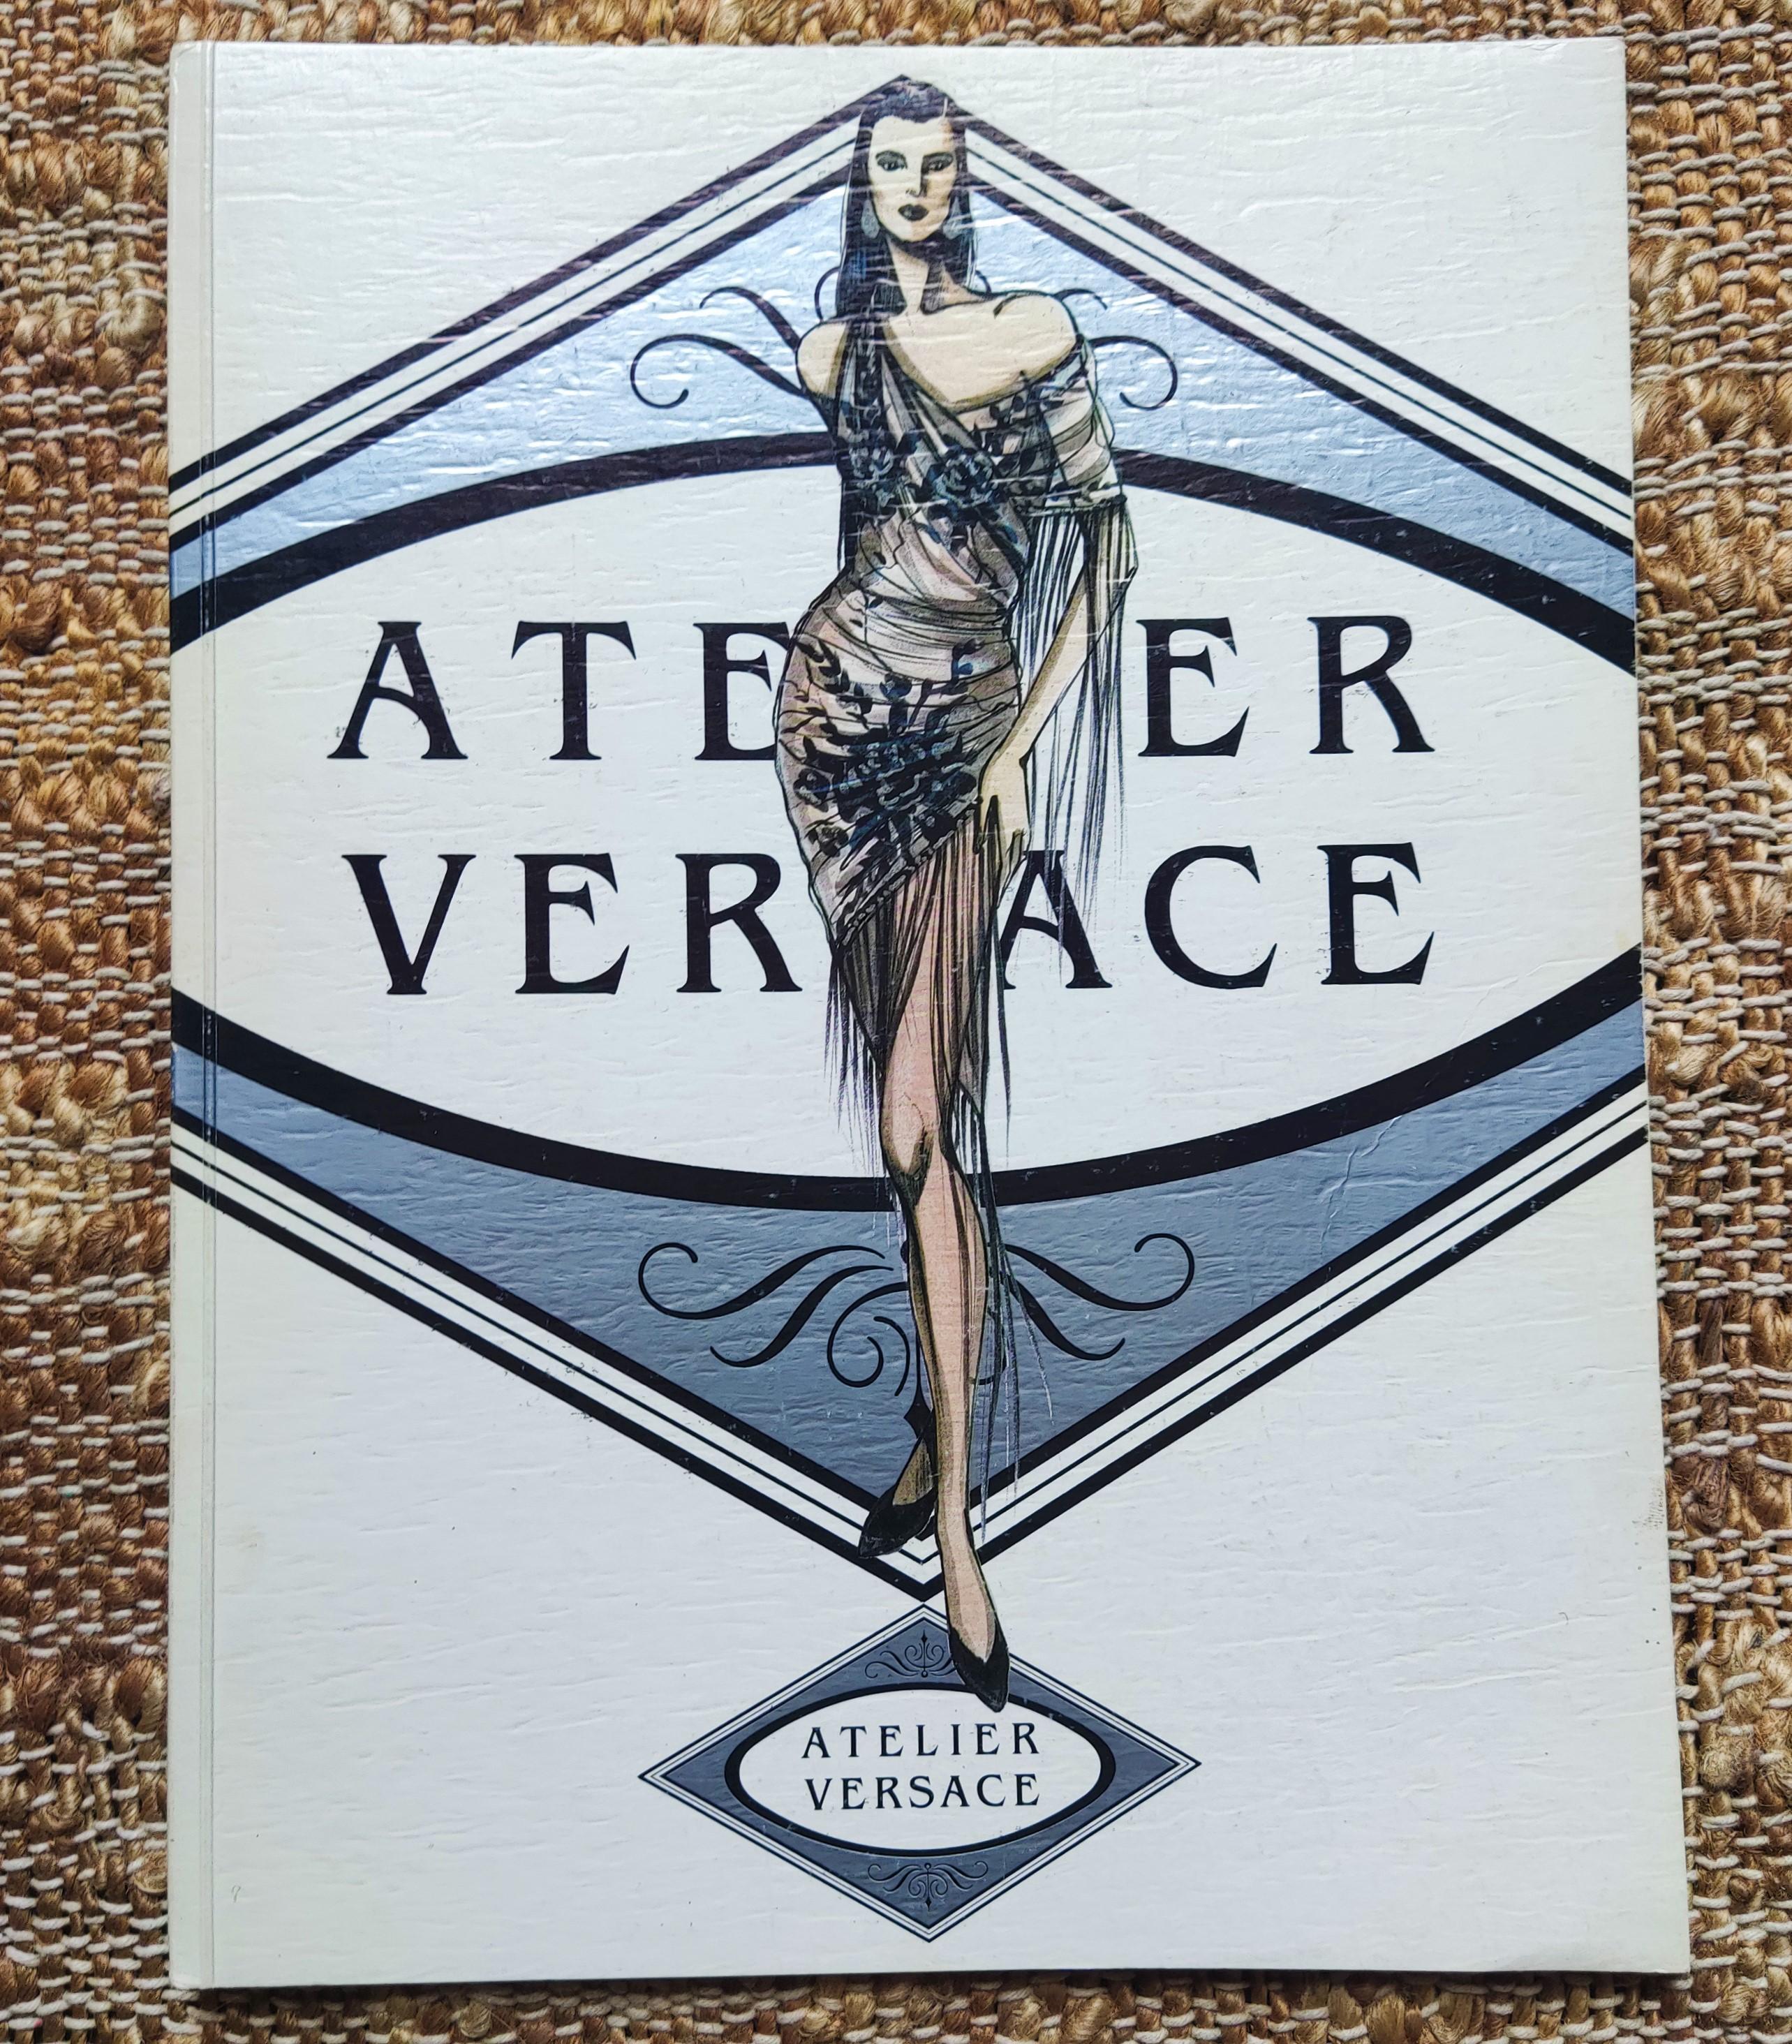 Atelier Versace catalog about the 1989-90 collection!

Wonderful illustrations such as:
Doctor Faustus
Elton John
David Bowie
Eric Clapton
Sting 
Cher
Chaka
Capriccio
The passion of Cleopatra
Swan Lake
Faye Dunaway
Artifact

VERY GOOD